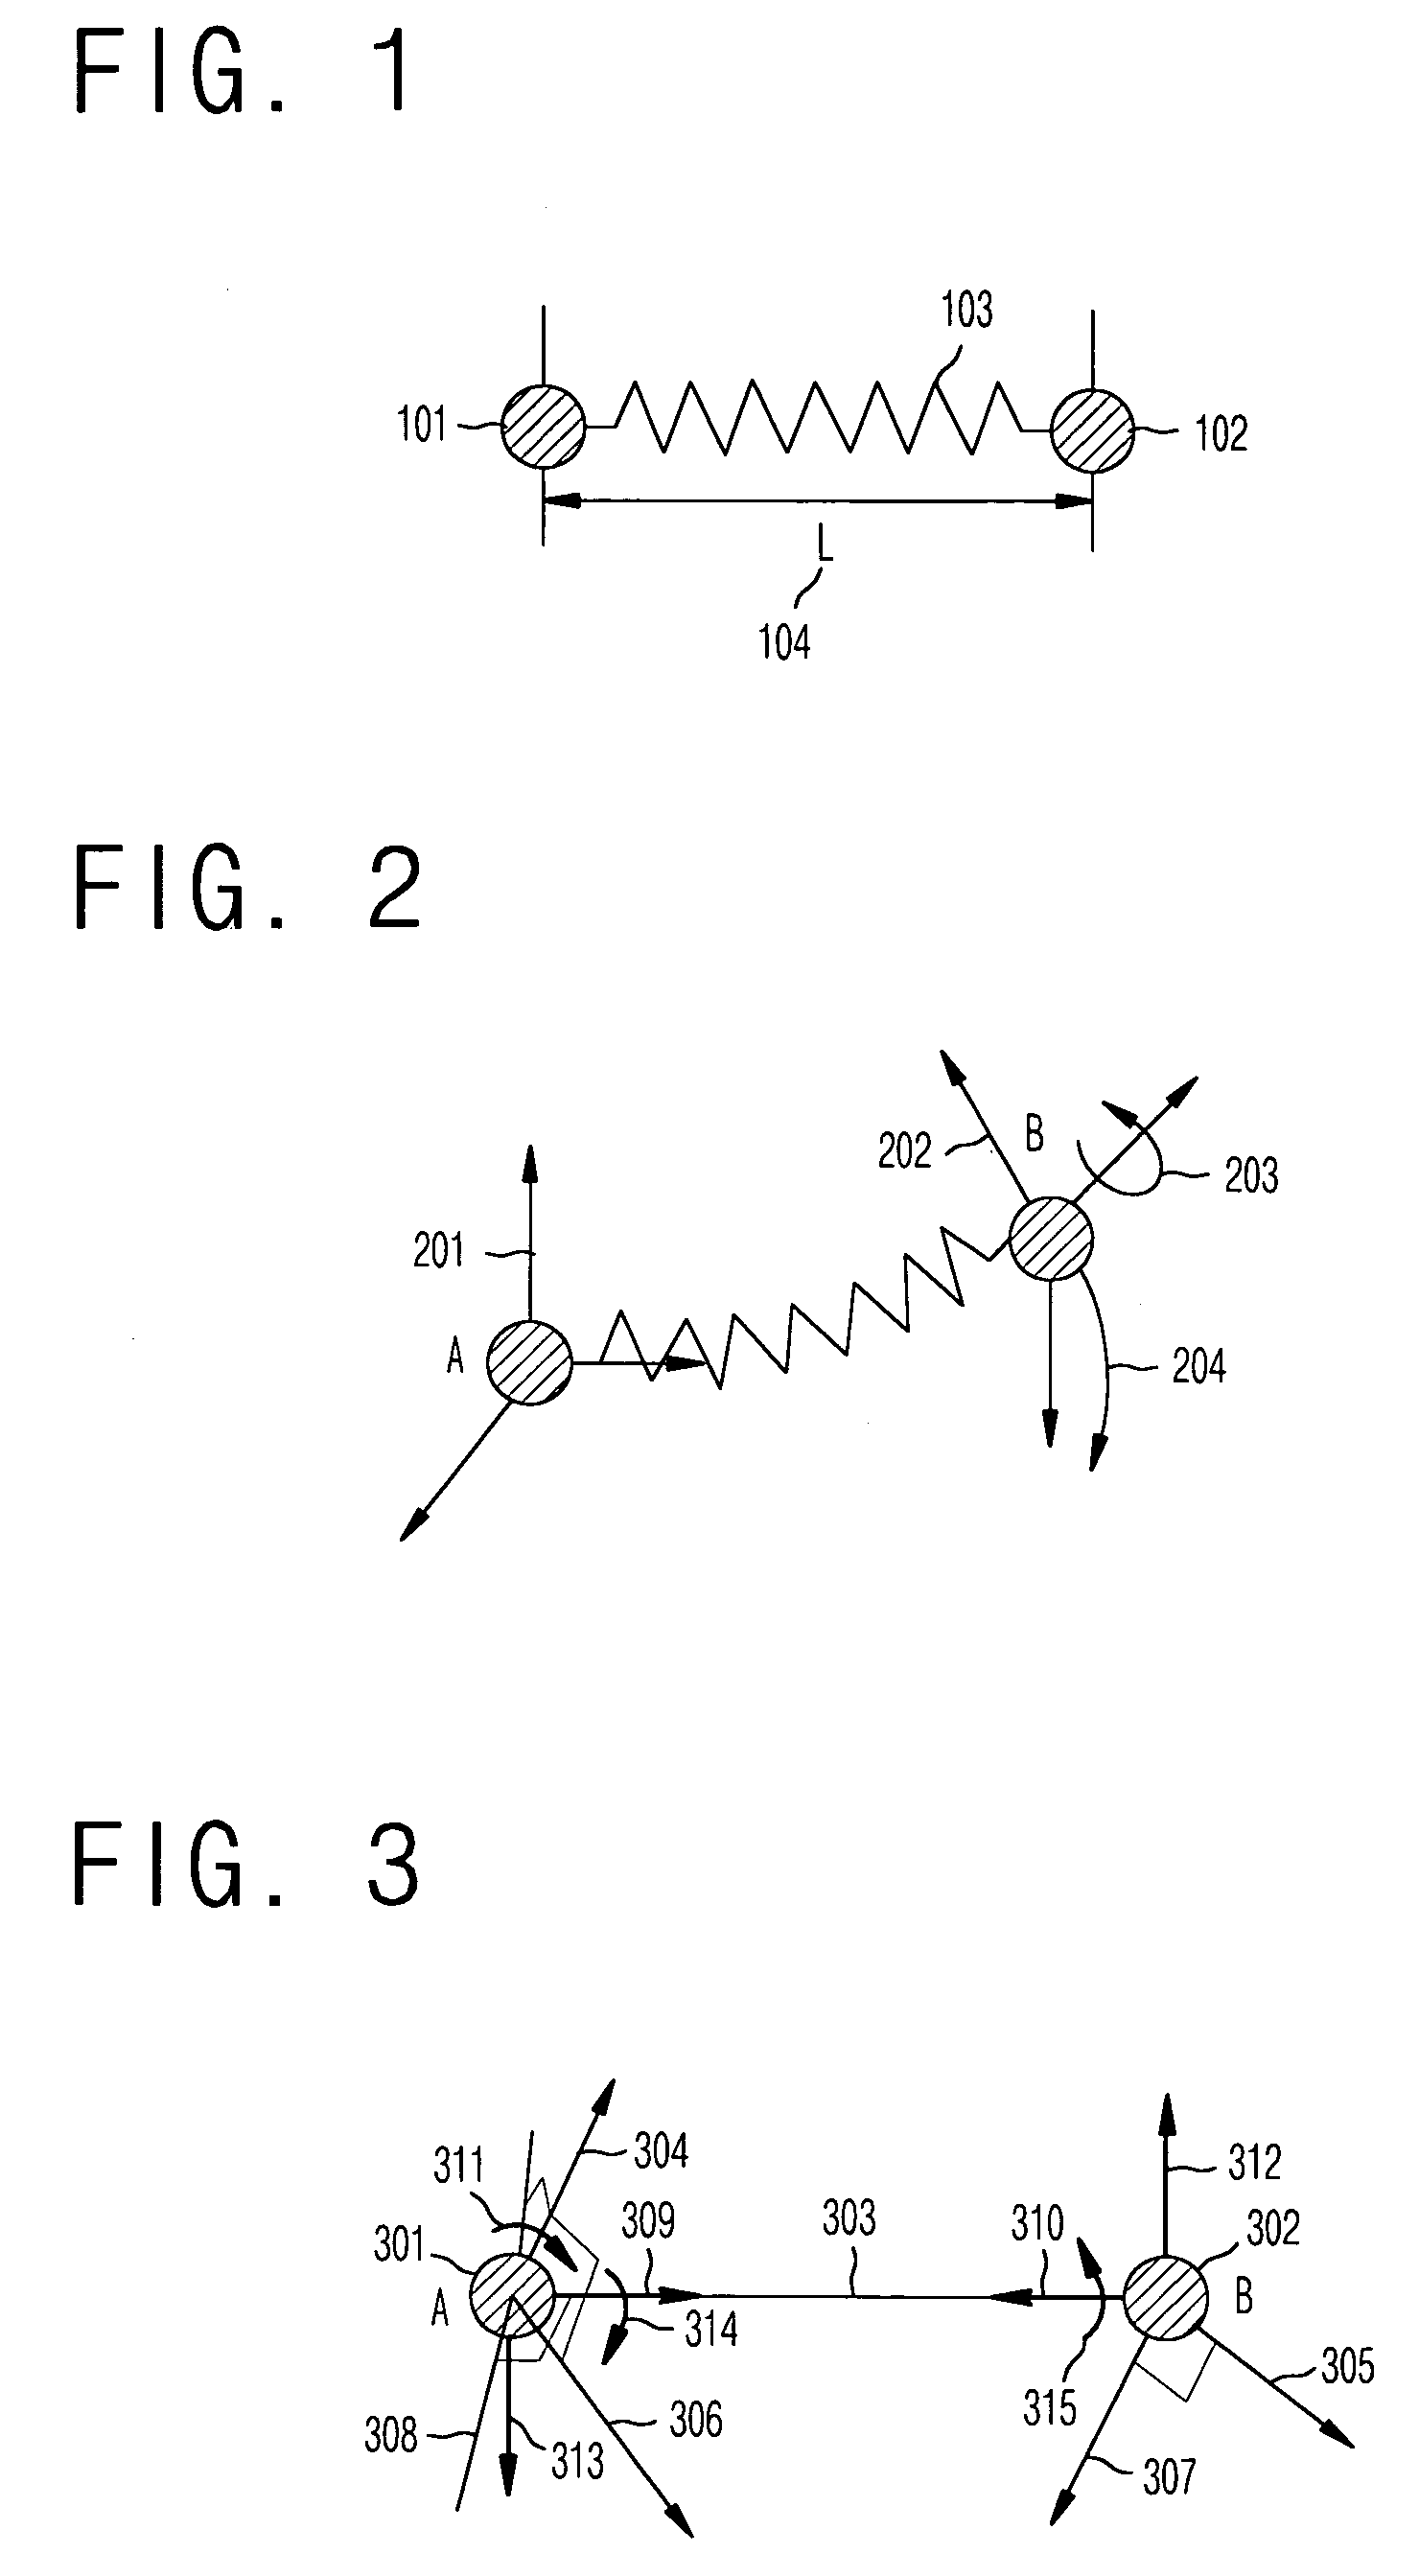 Animation method of deformable objects using an oriented material point and generalized spring model